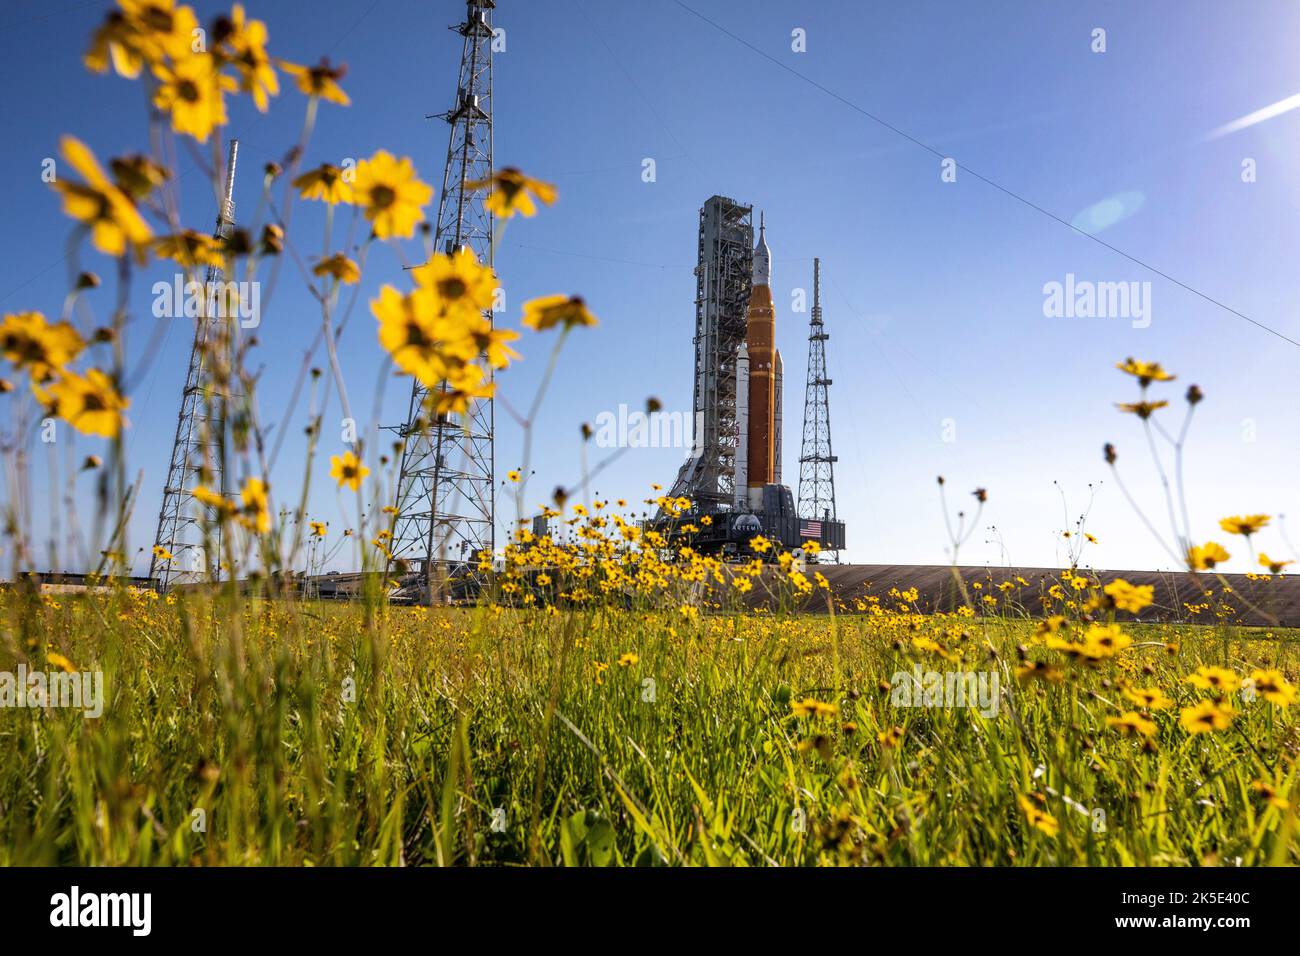 With wildflowers surrounding the view, NASA's Space Launch System (SLS) Moon rocket carried atop the Crawler-Transporter 2 arrives at LaunchPad 39B at the agency's Kennedy Space Center, Florida on June 6, 2022. The first in an increasingly complex series of missions, Artemis I will test the SLS rocket and Orion spacecraft as an integrated system prior to crewed flights to the Moon. Through Artemis, NASA will land the first woman and first person of colour on the Moon, paving the way for a long-term lunar presence and using the Moon as a steppingstone to Mars  Credit: NASA/ Smegelsky Stock Photo